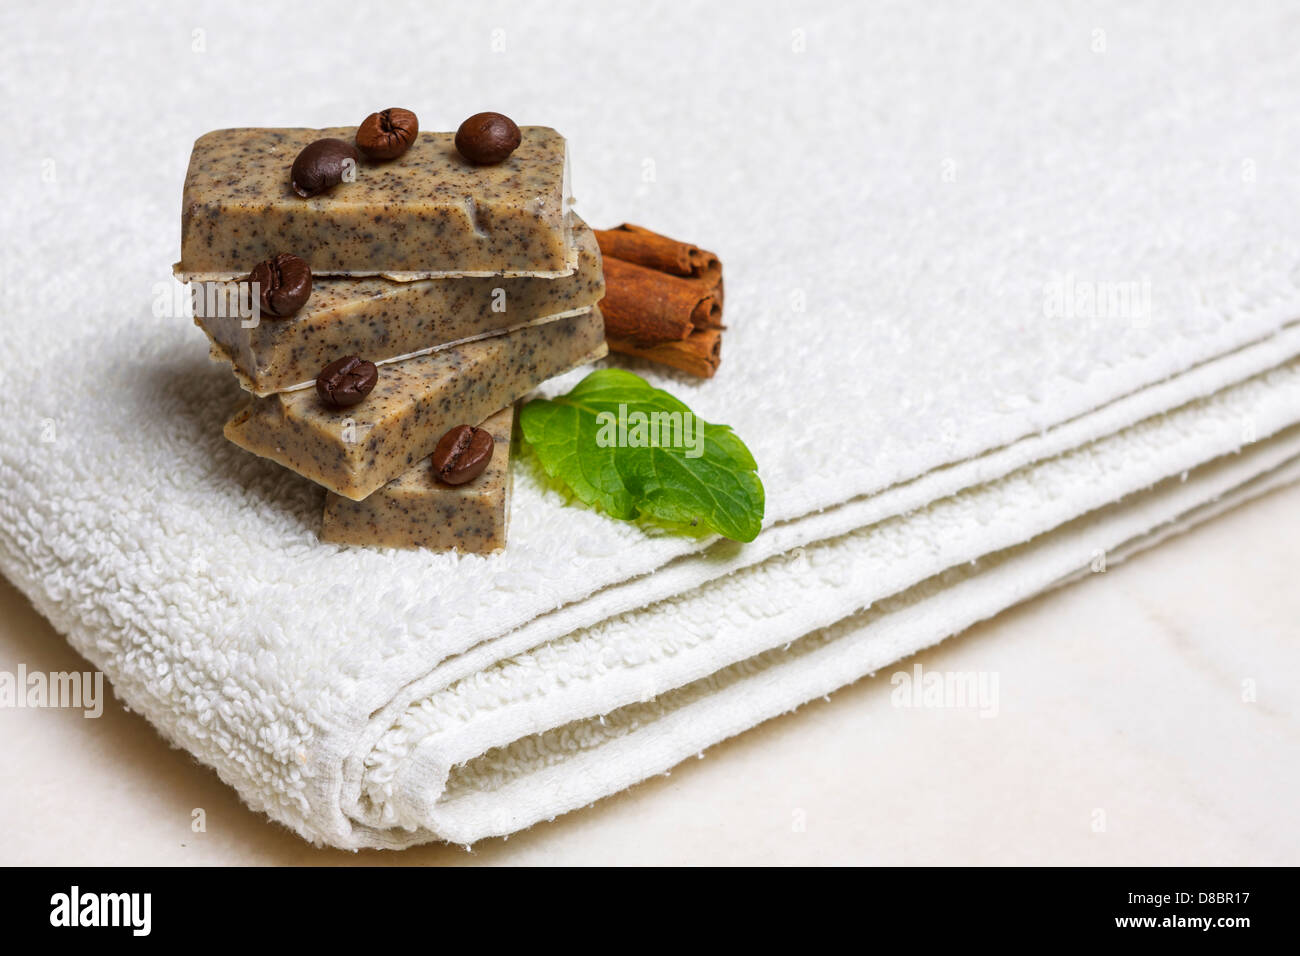 Stack of homemade flavored soap bars surrounded by coffee beans, cinnamon and lavender leaf on white towel. Stock Photo